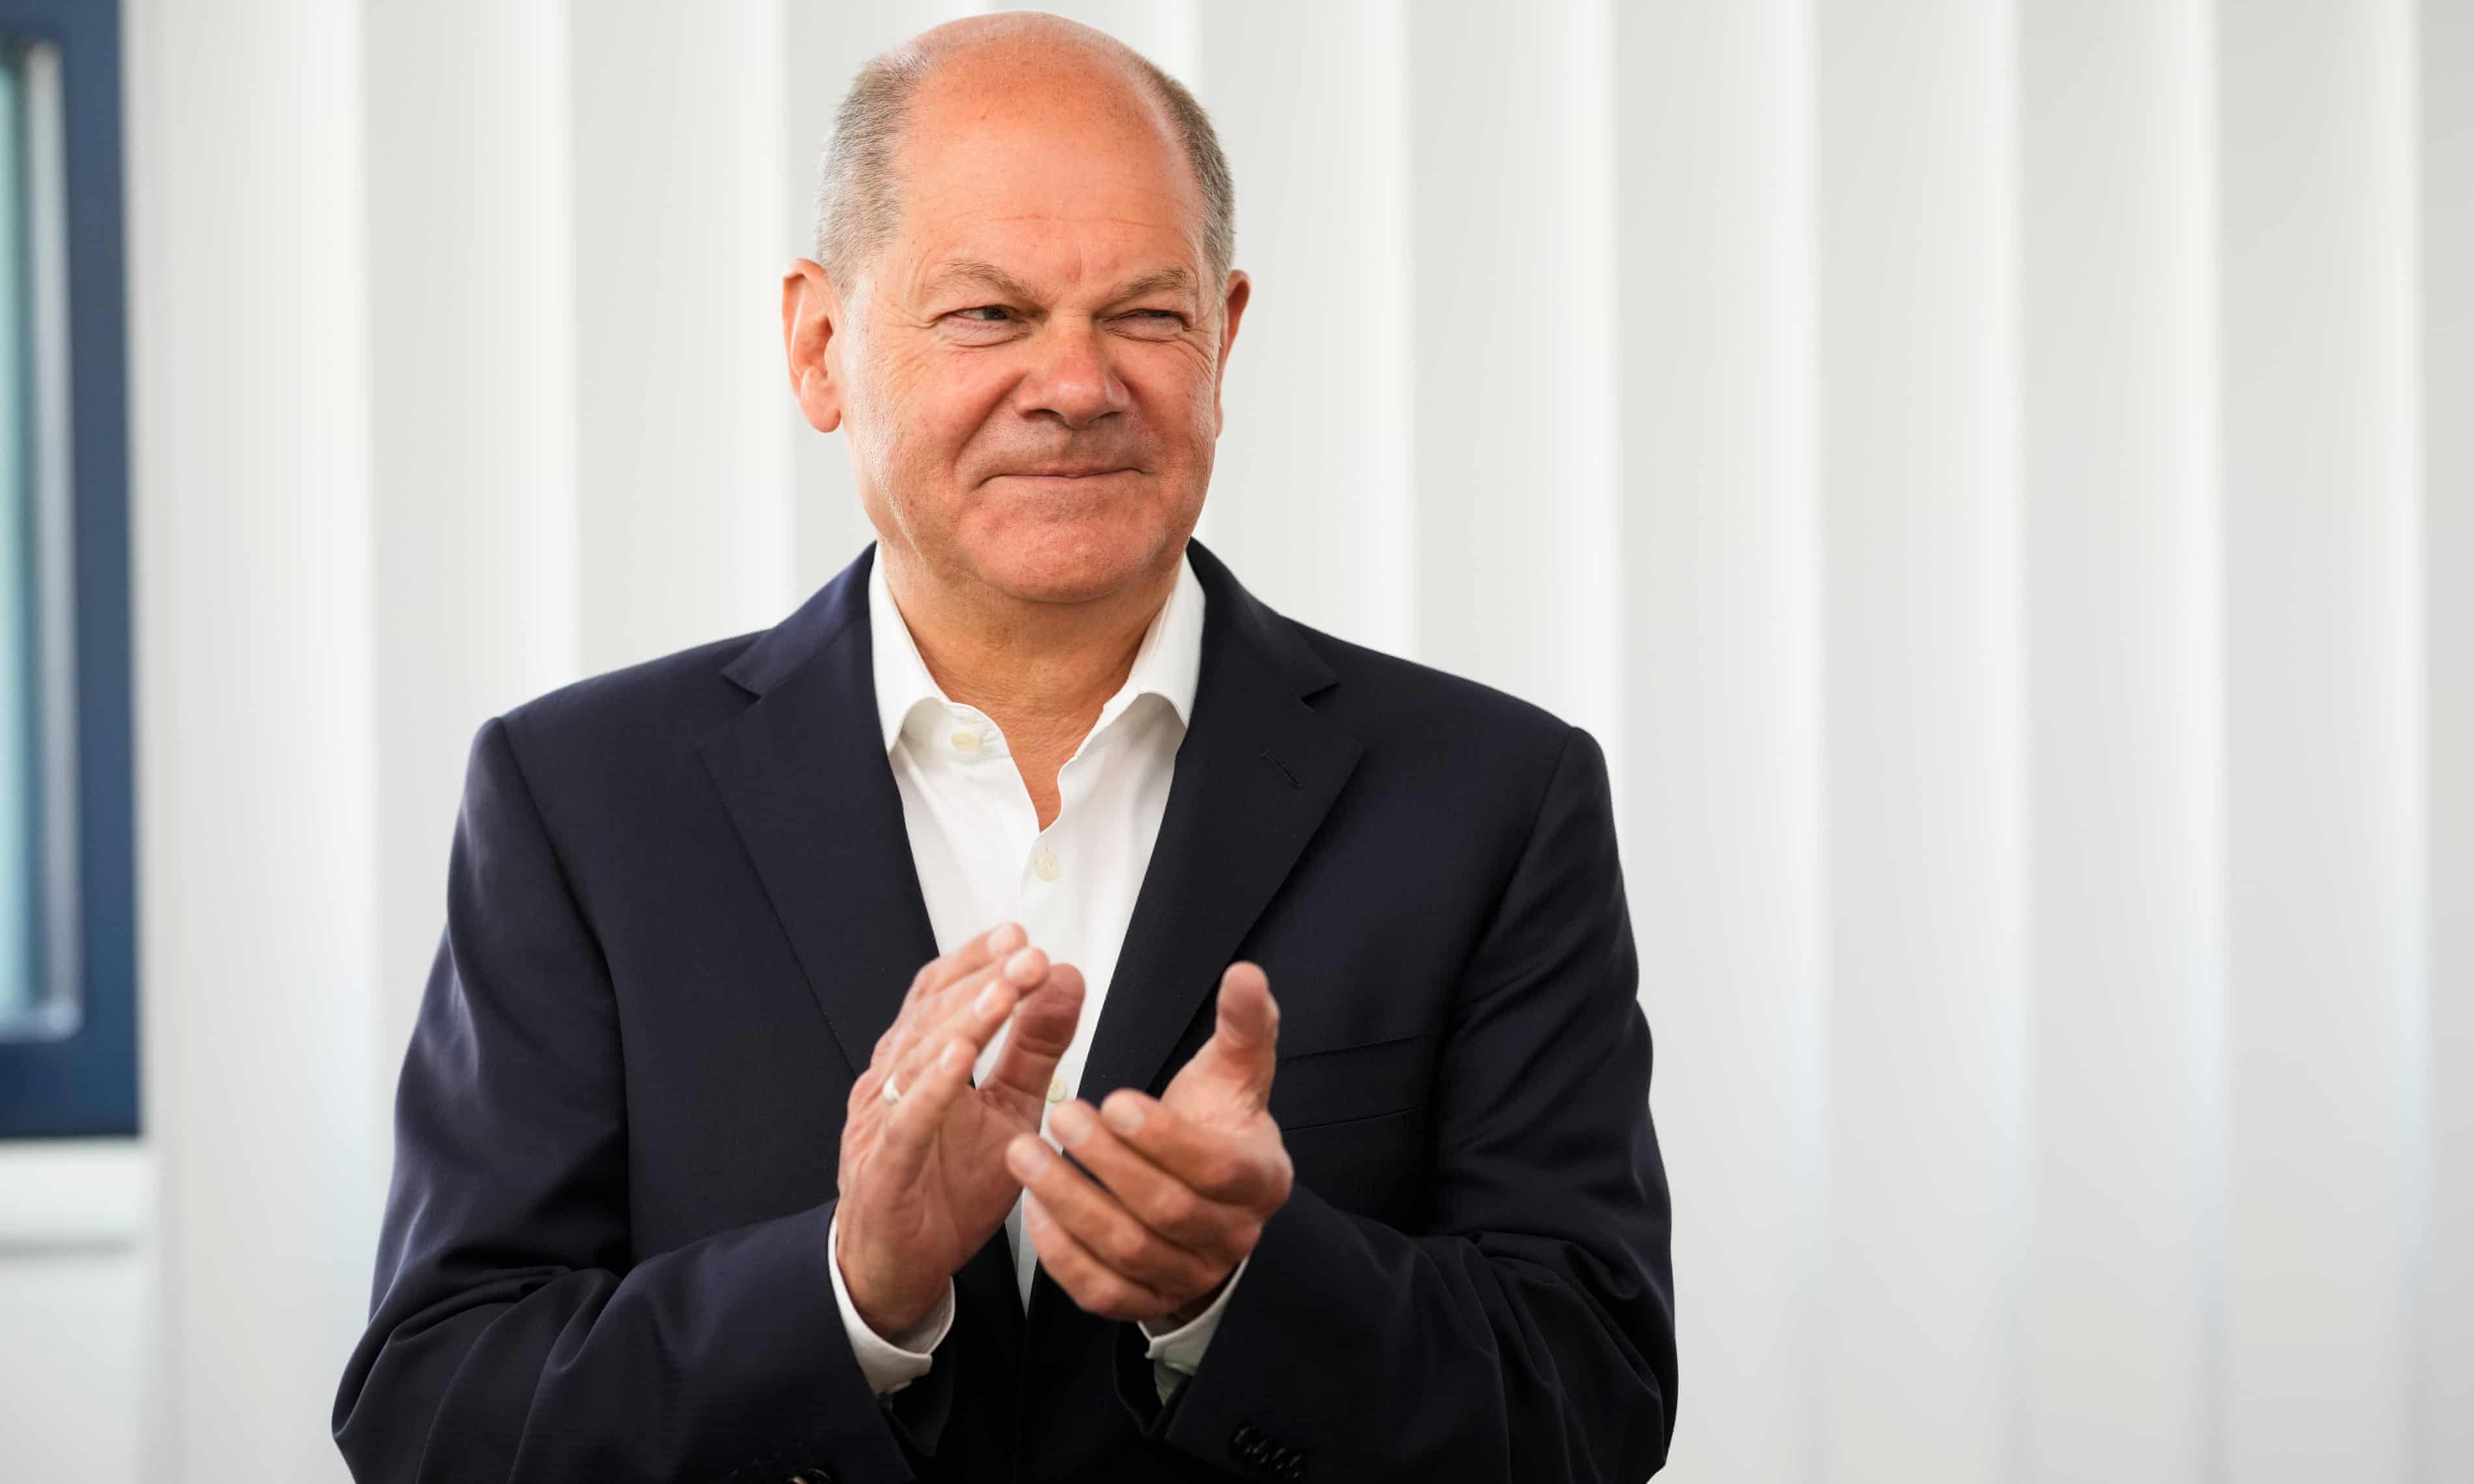 Scholz rules out snap election in Germany after far right surge across Europe (theguardian.com)